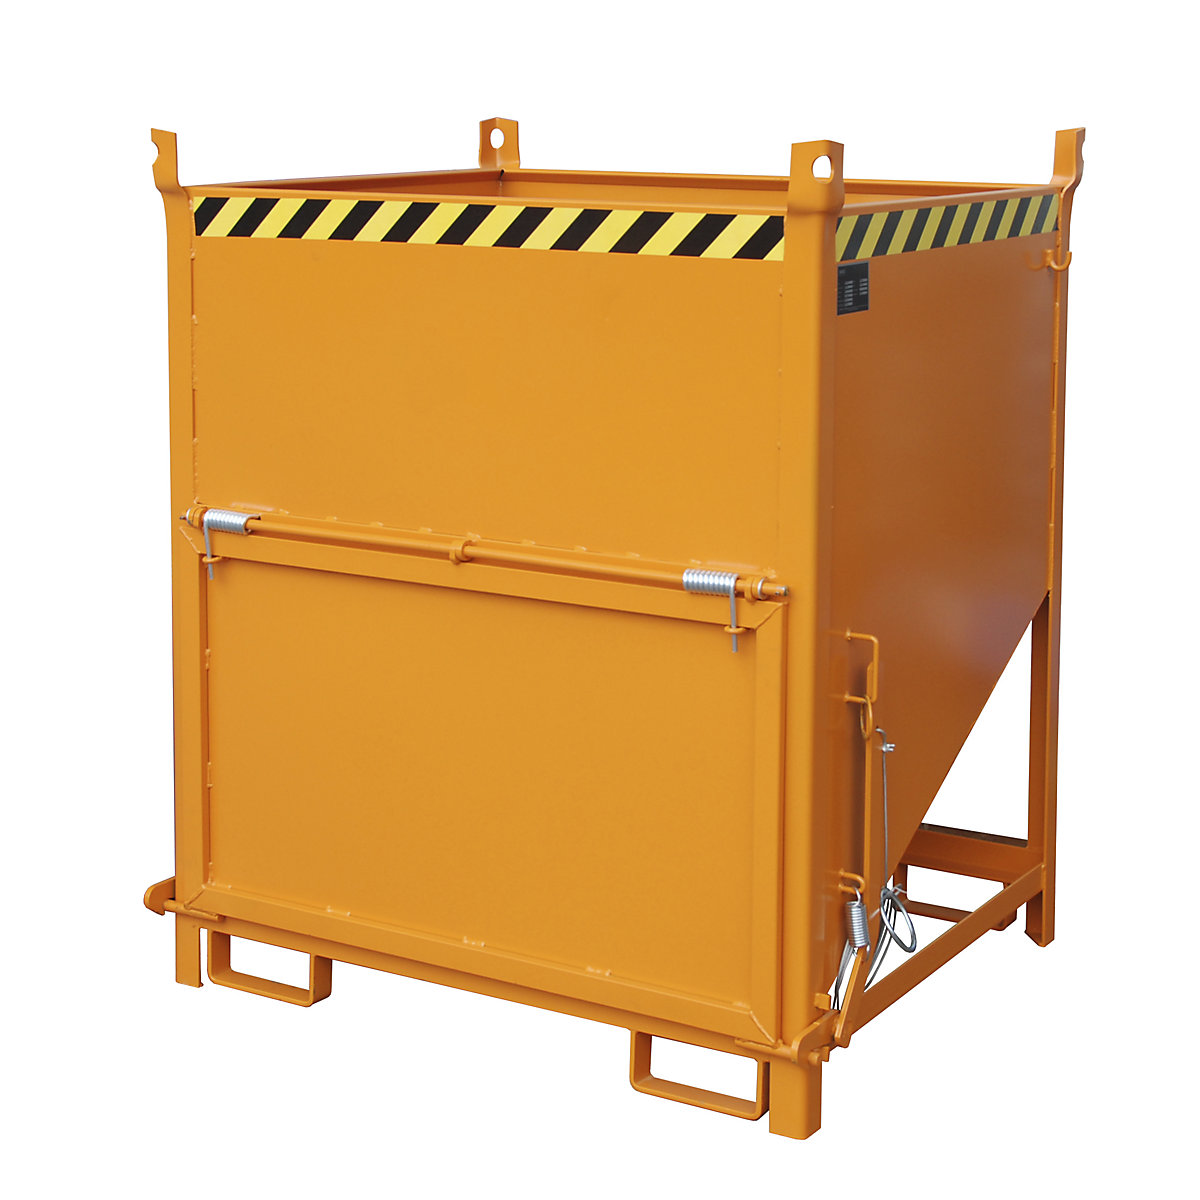 Silo container – eurokraft pro, capacity 1 m³, with front flap, yellow orange RAL 2000-6